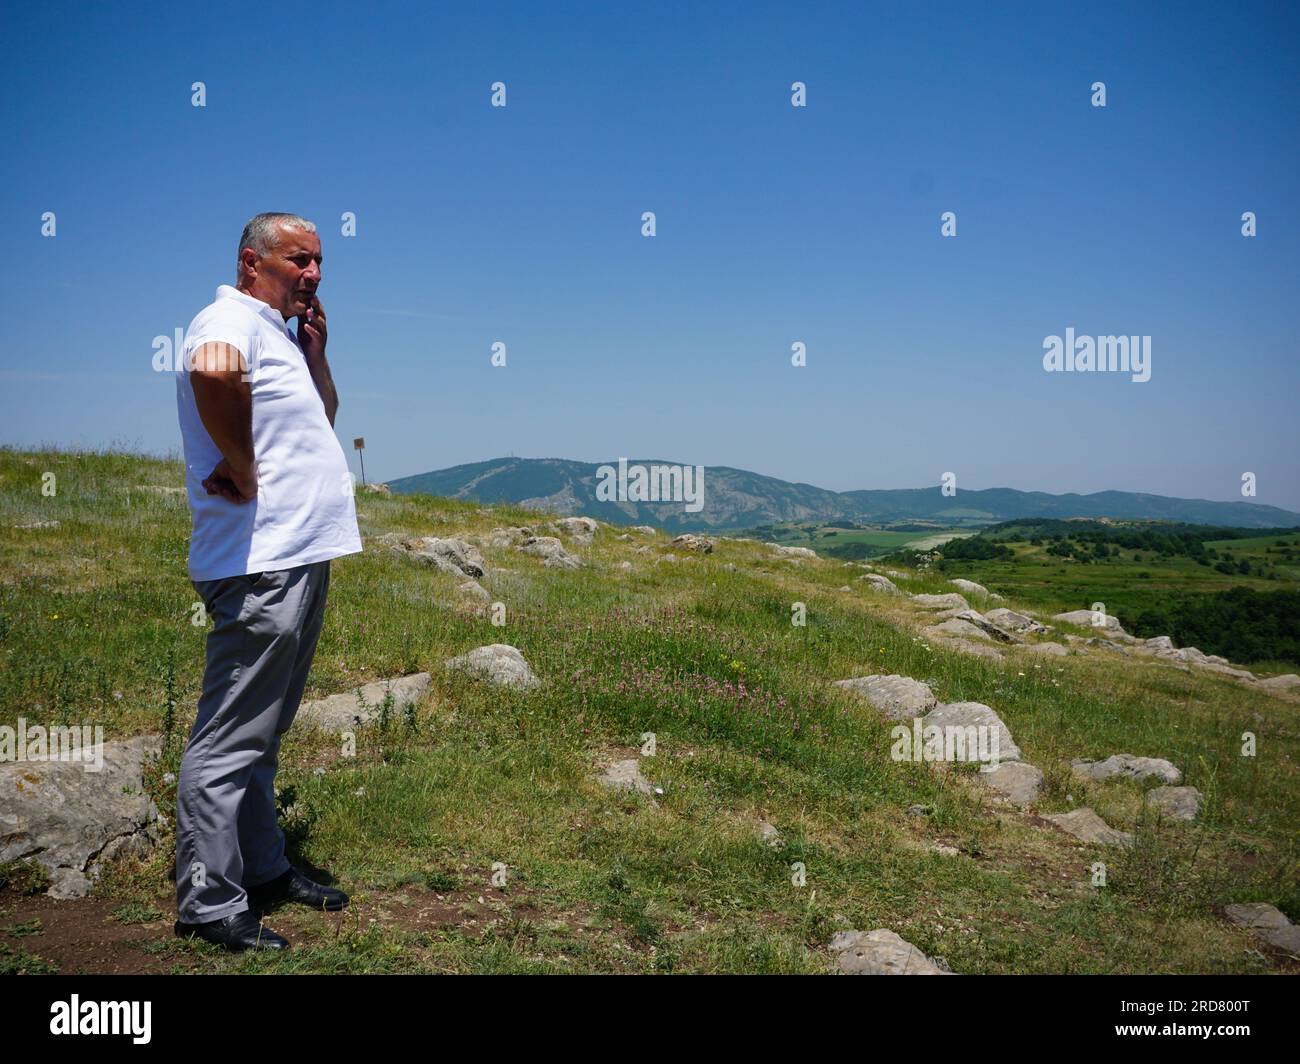 A man seen at one of the mountains in Shusha, Nagorno-Karabakh. The unrecognised yet de facto independent country in South Caucasus, Nagorno-Karabakh (also known as Artsakh) has been in the longest-running territorial dispute between Azerbaijan and Armenia in post-Soviet Eurasia since the collapse of Soviet Union. It is mainly populated by ethnic Armenians. Stock Photo